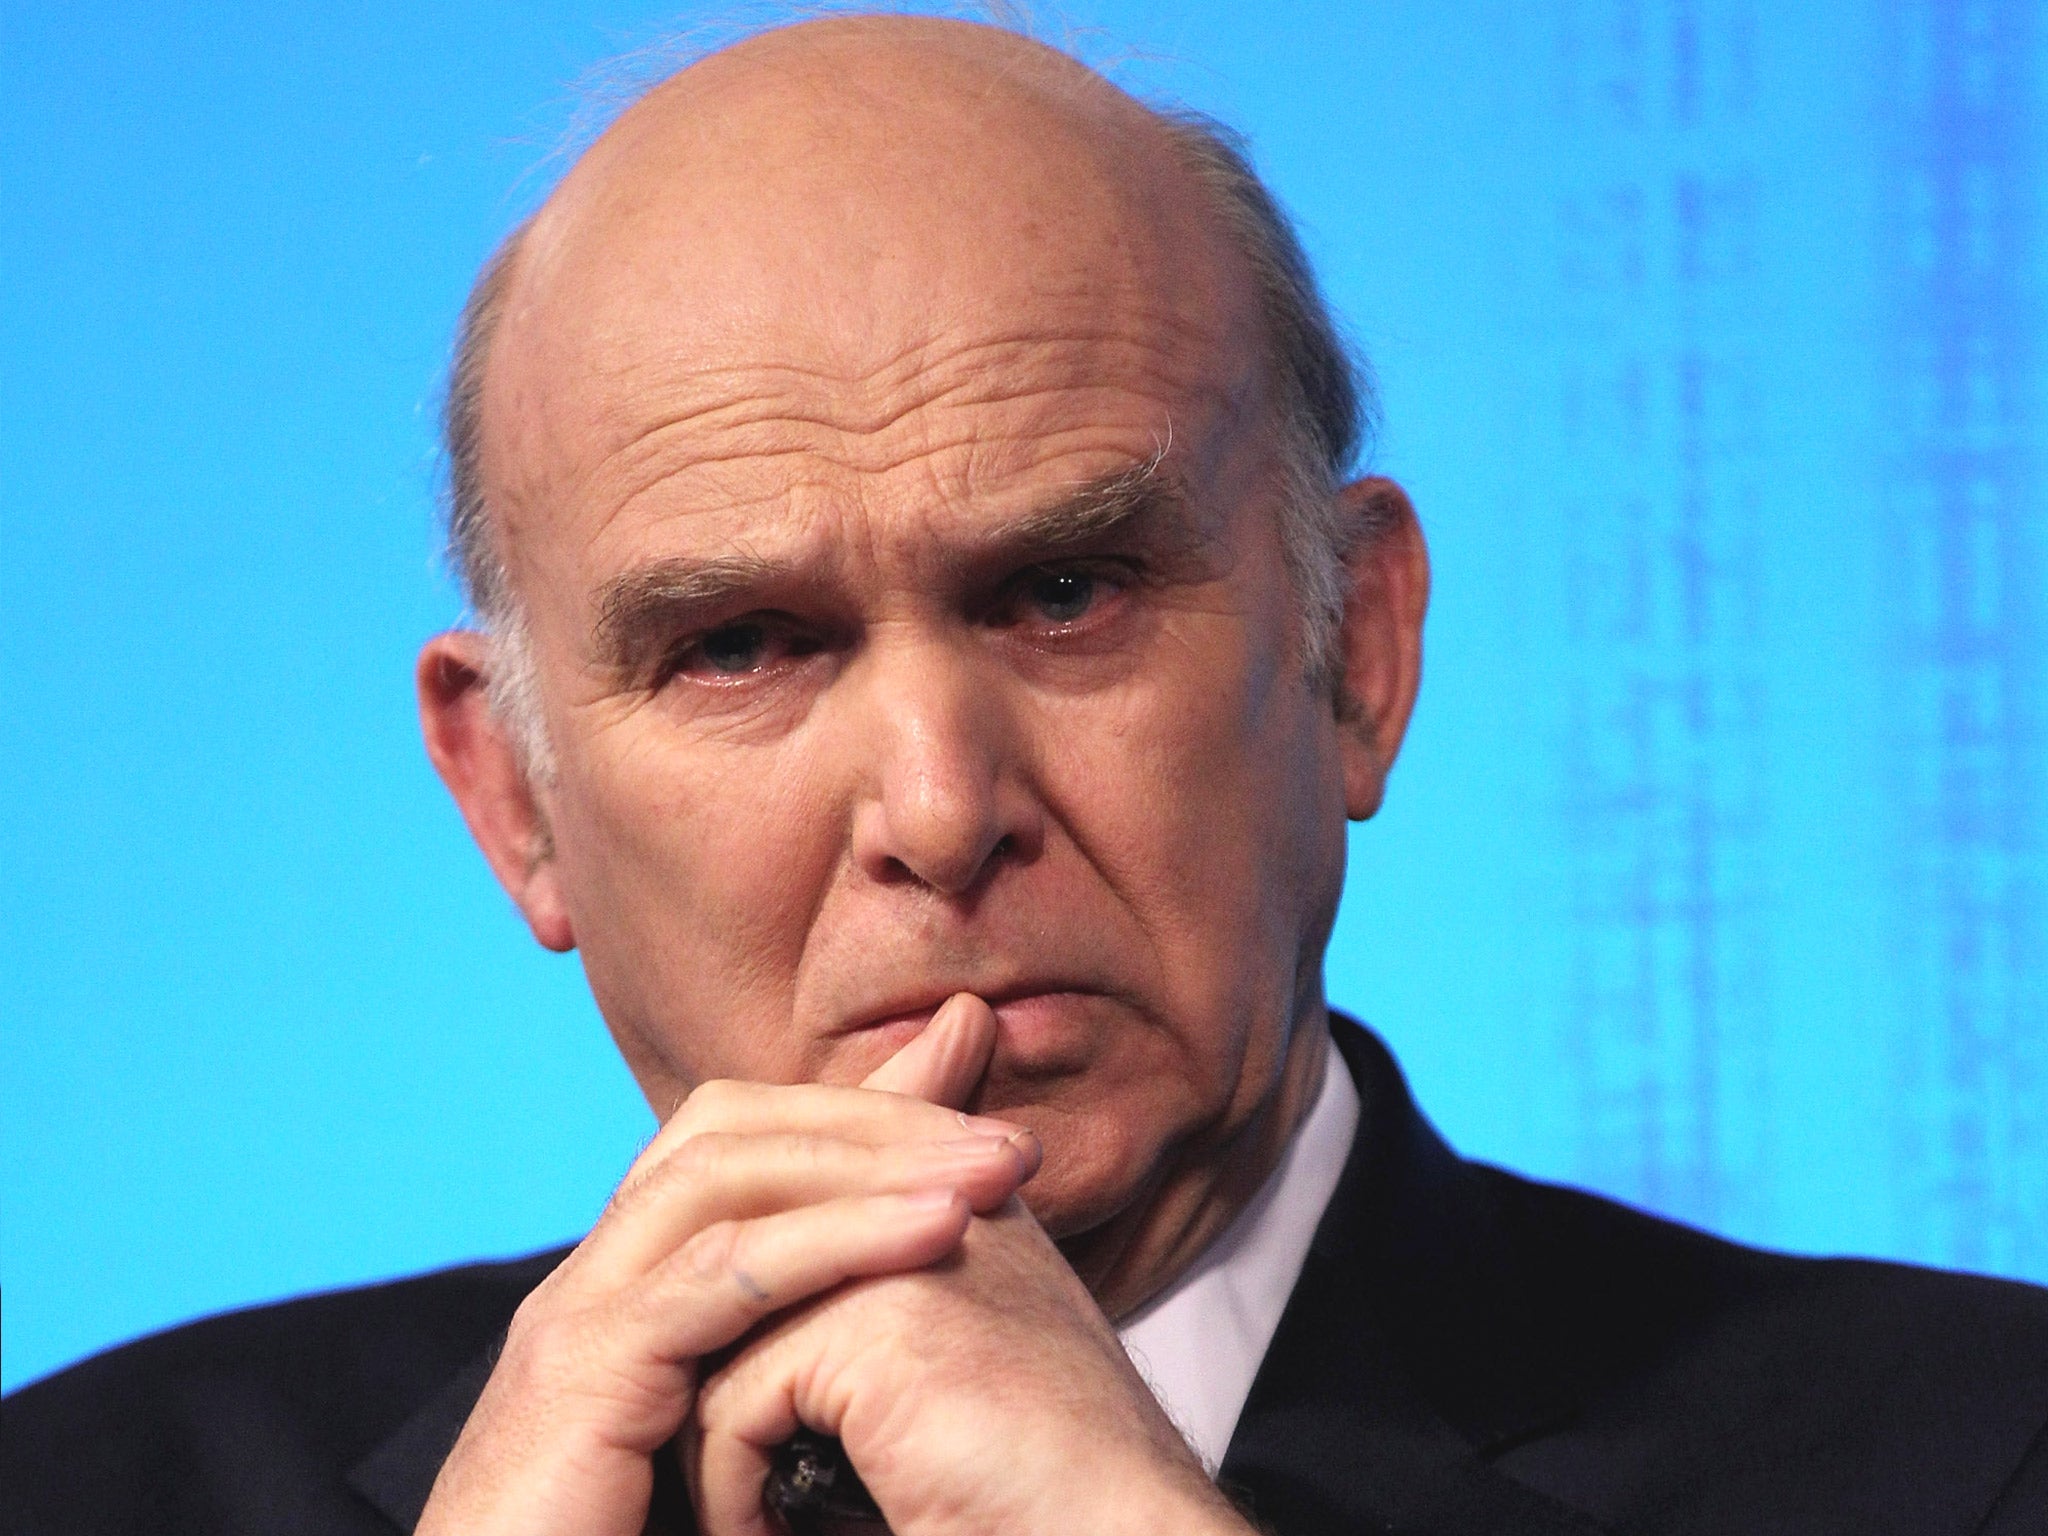 Vince Cable refuses to apologise over the losses, and says Royal Mail remains fragile (Getty)